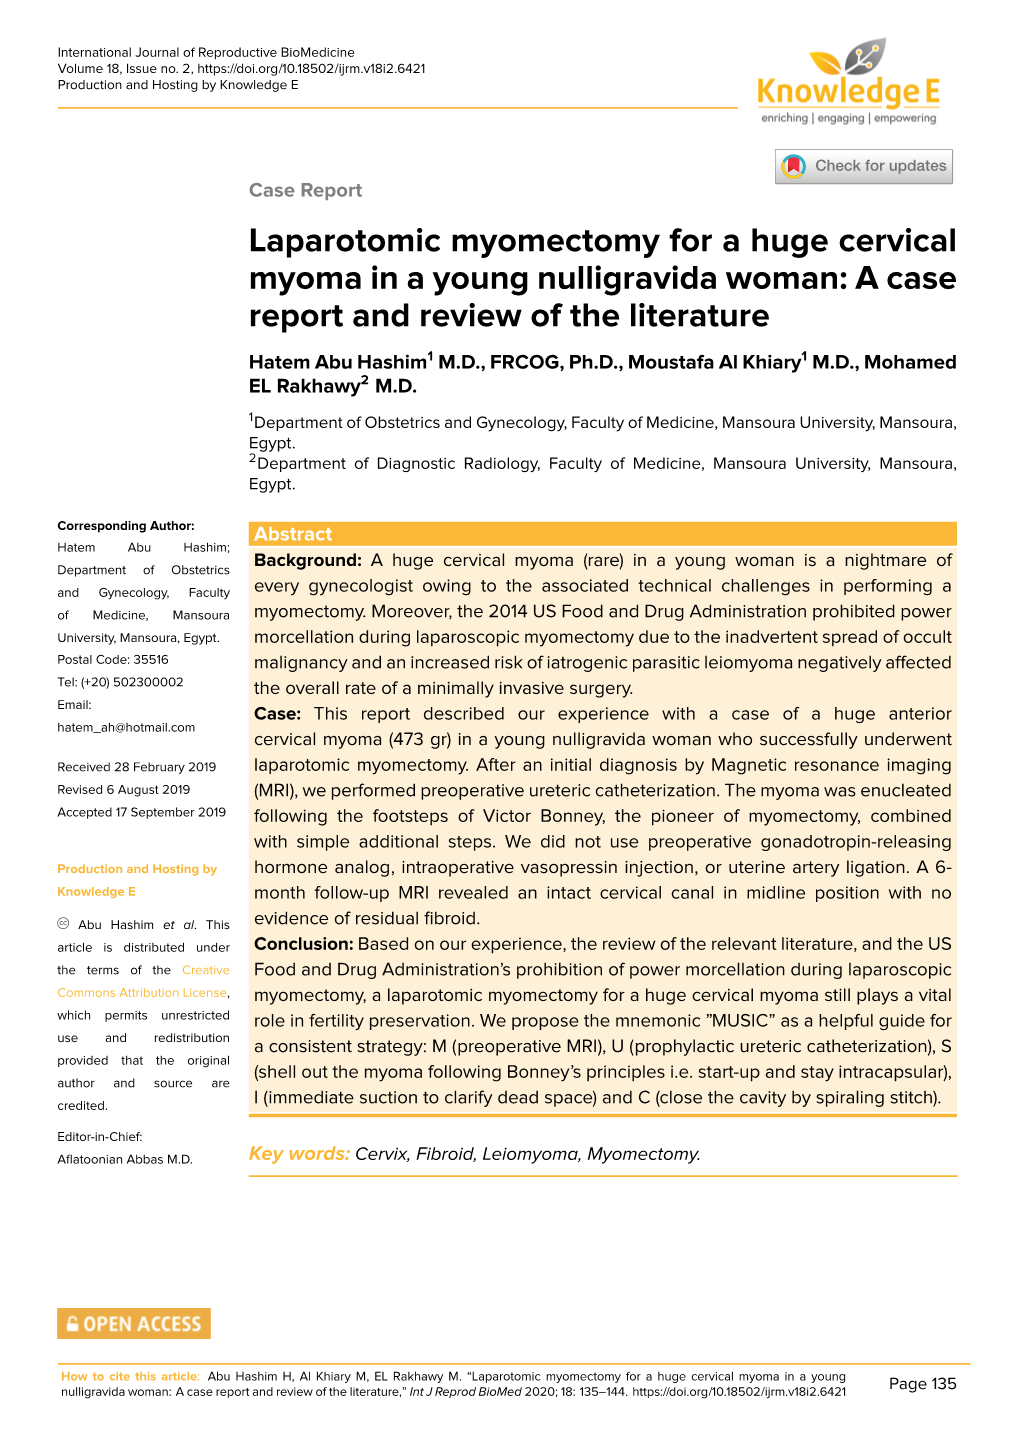 Laparotomic Myomectomy for a Huge Cervical Myoma in a Young